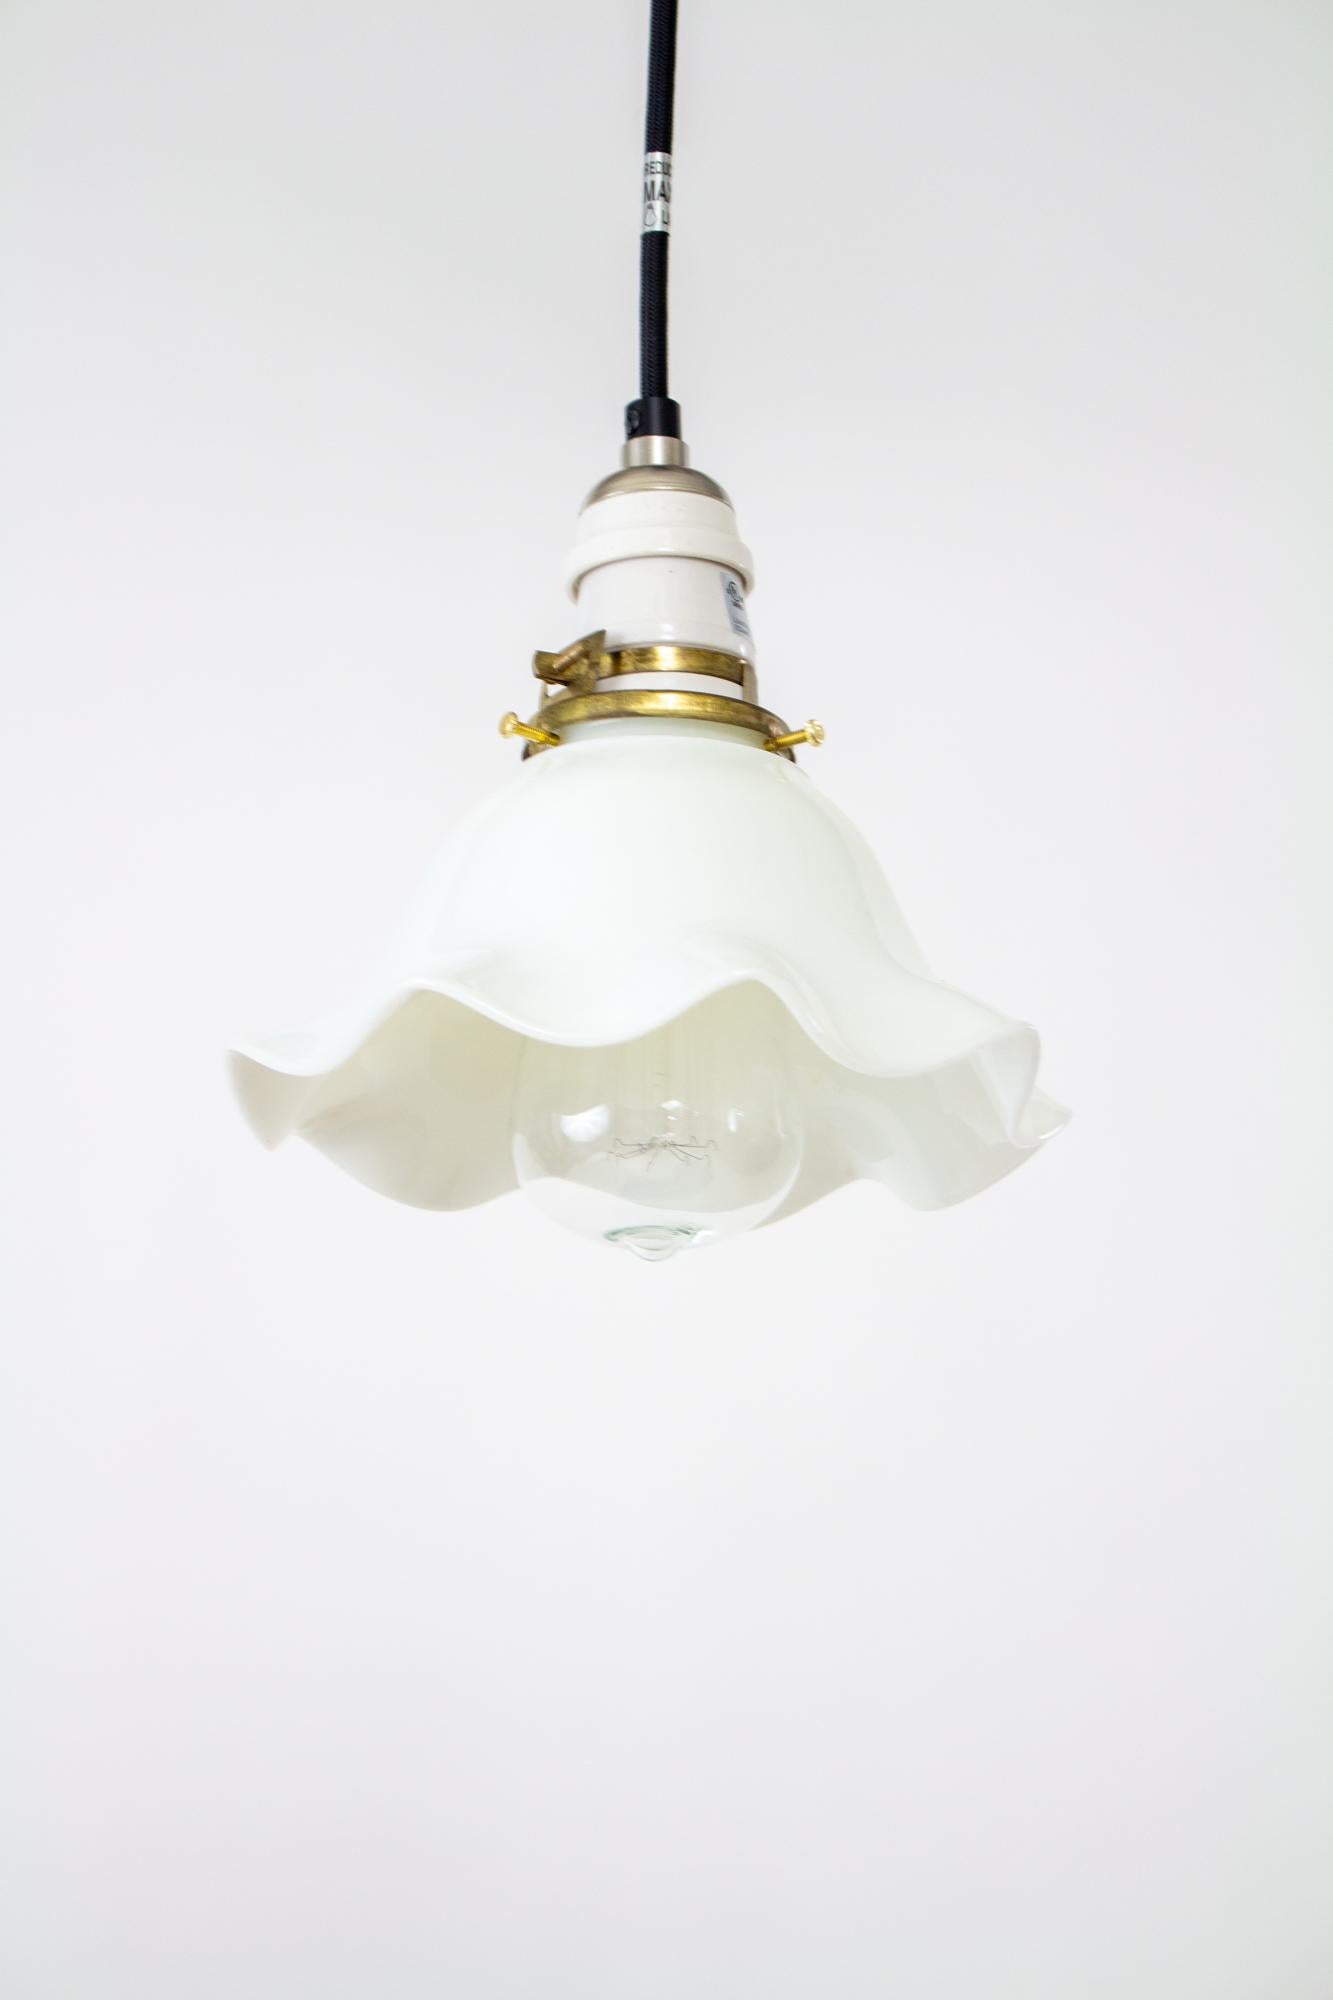 Early 20th century industrial white frilly milk glass pendant. Black cord and canopy, porcelain antique style socket, antique clamp fitter and milk glass disk shade. Shown with Edison style bulb as a style suggestion, bulb is not included. Fixture